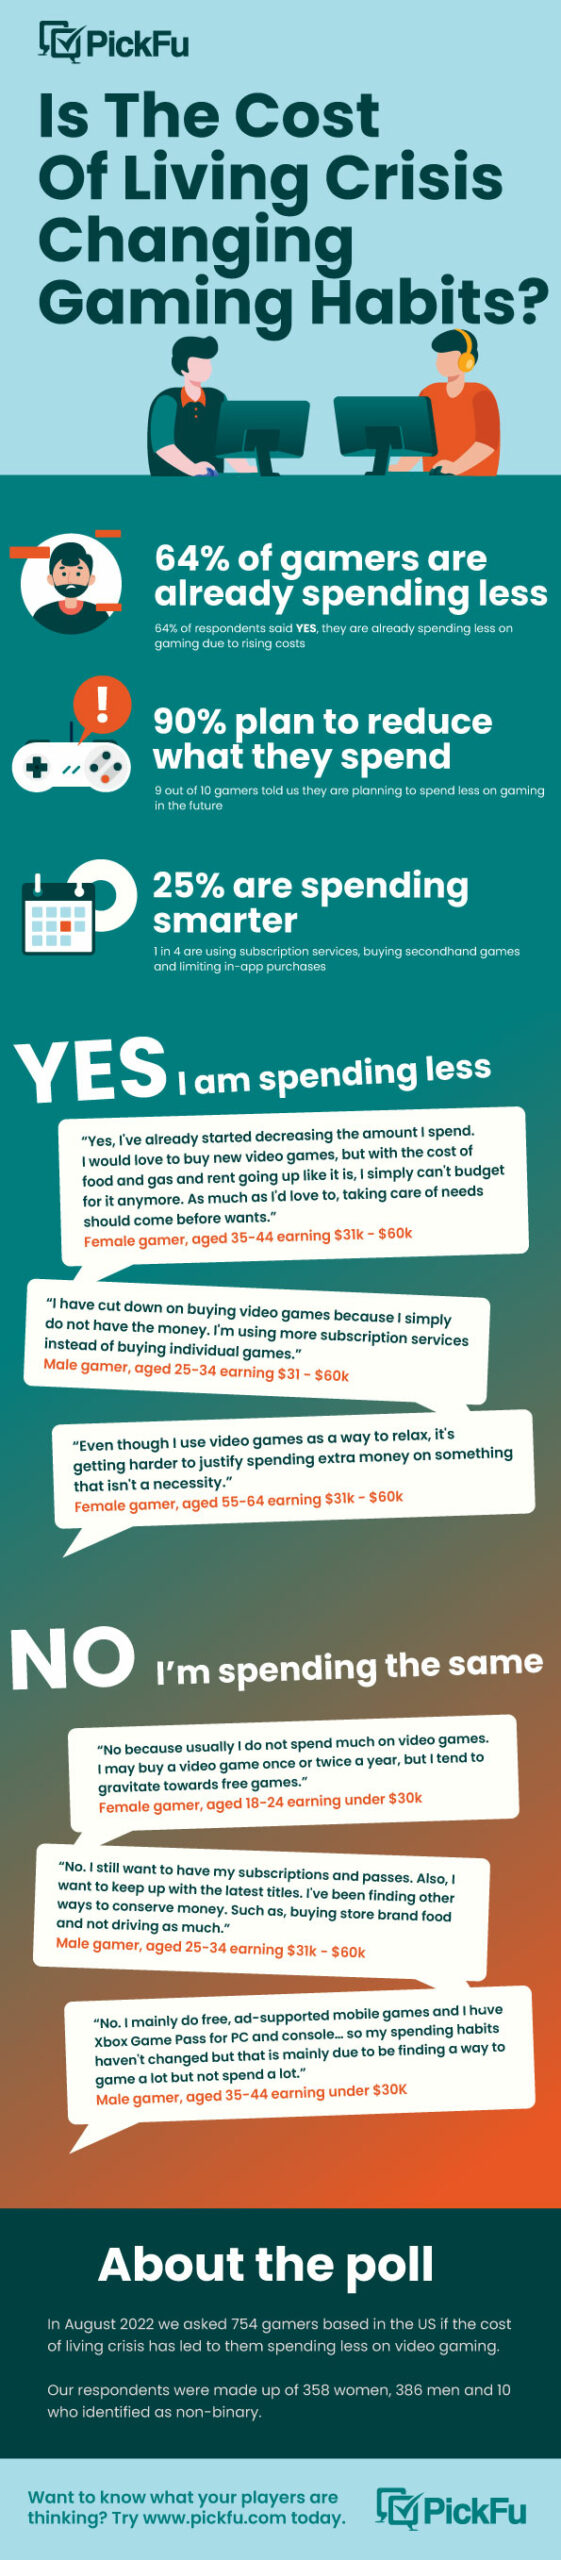 Infographic of the impact of the cost of living crisis on gamers' spending habits in 2023